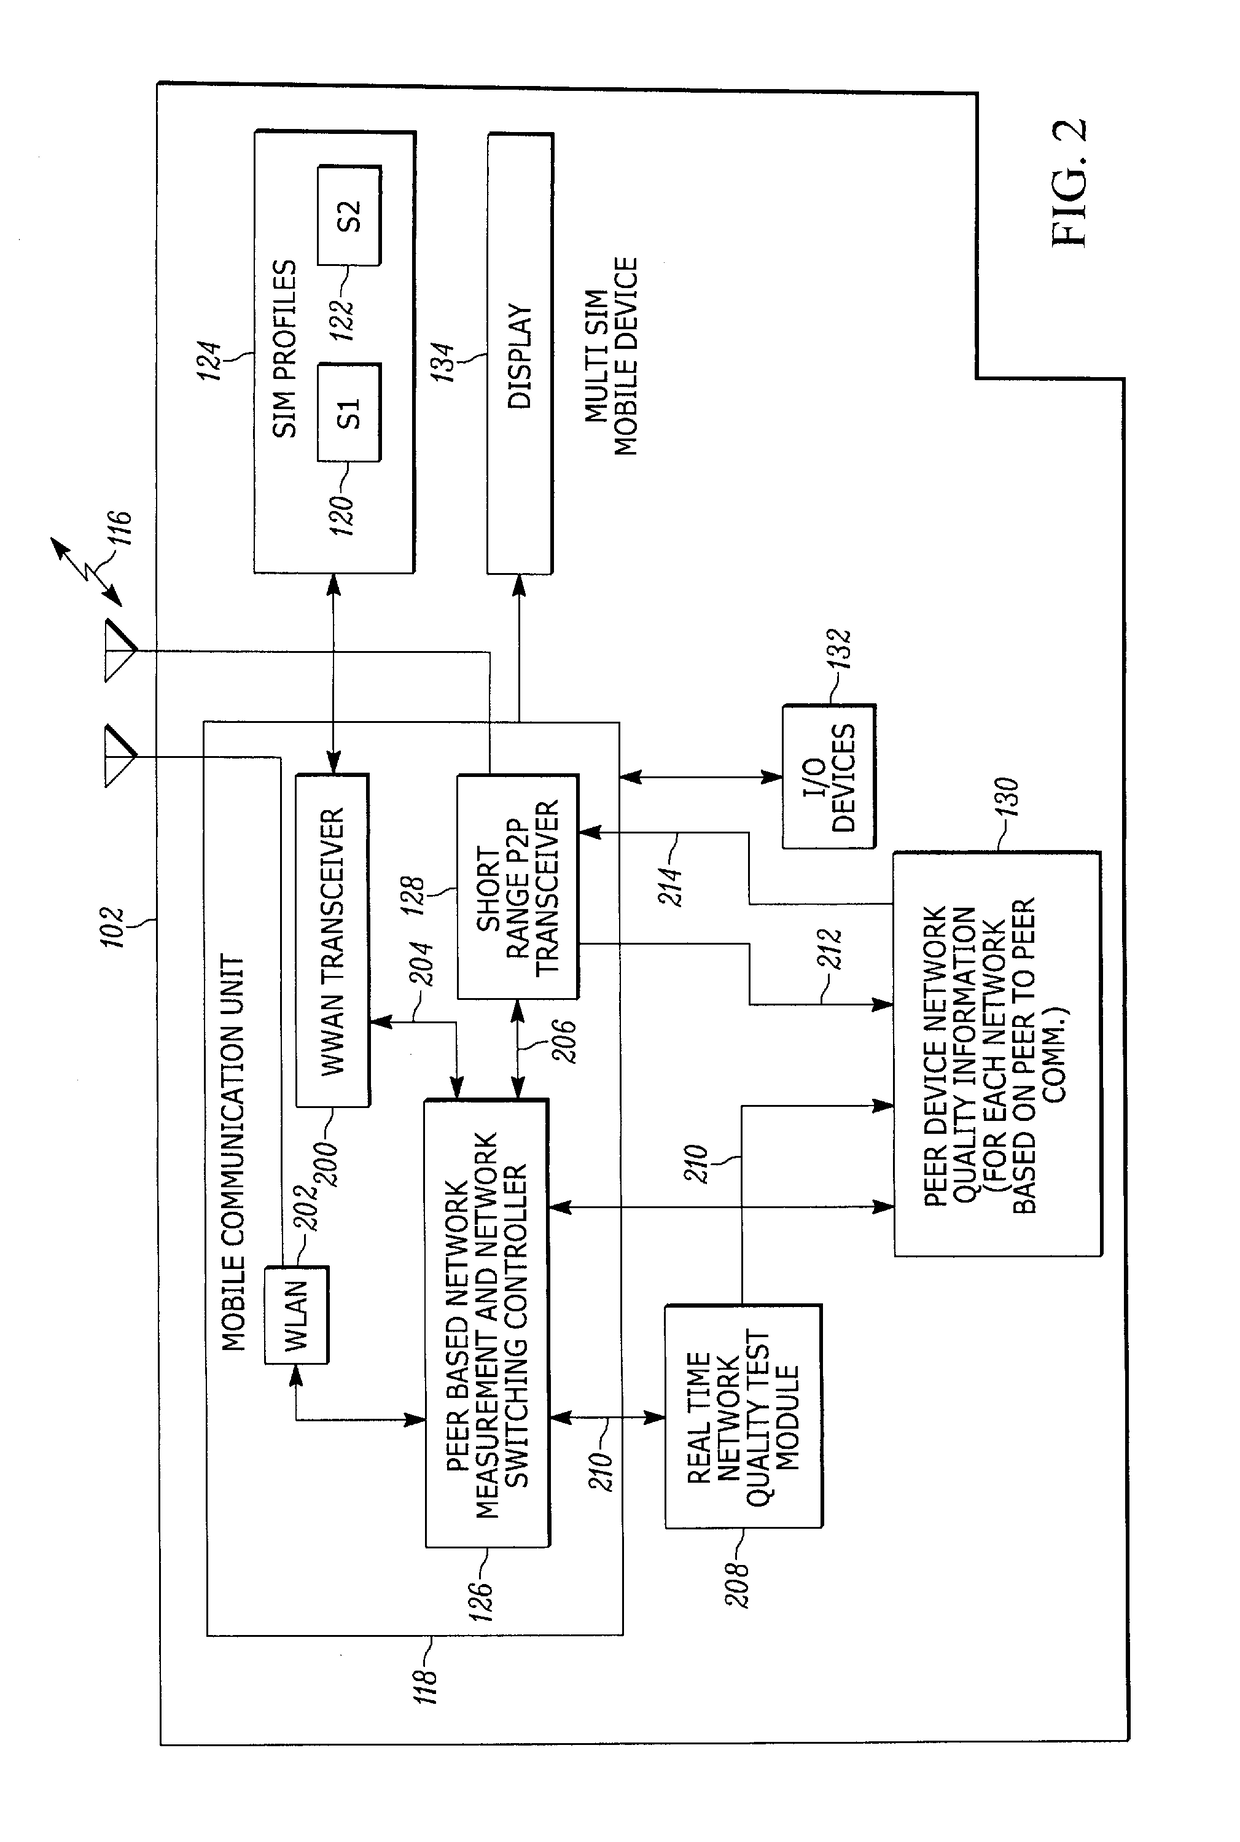 Method and apparatus for providing peer based network switching